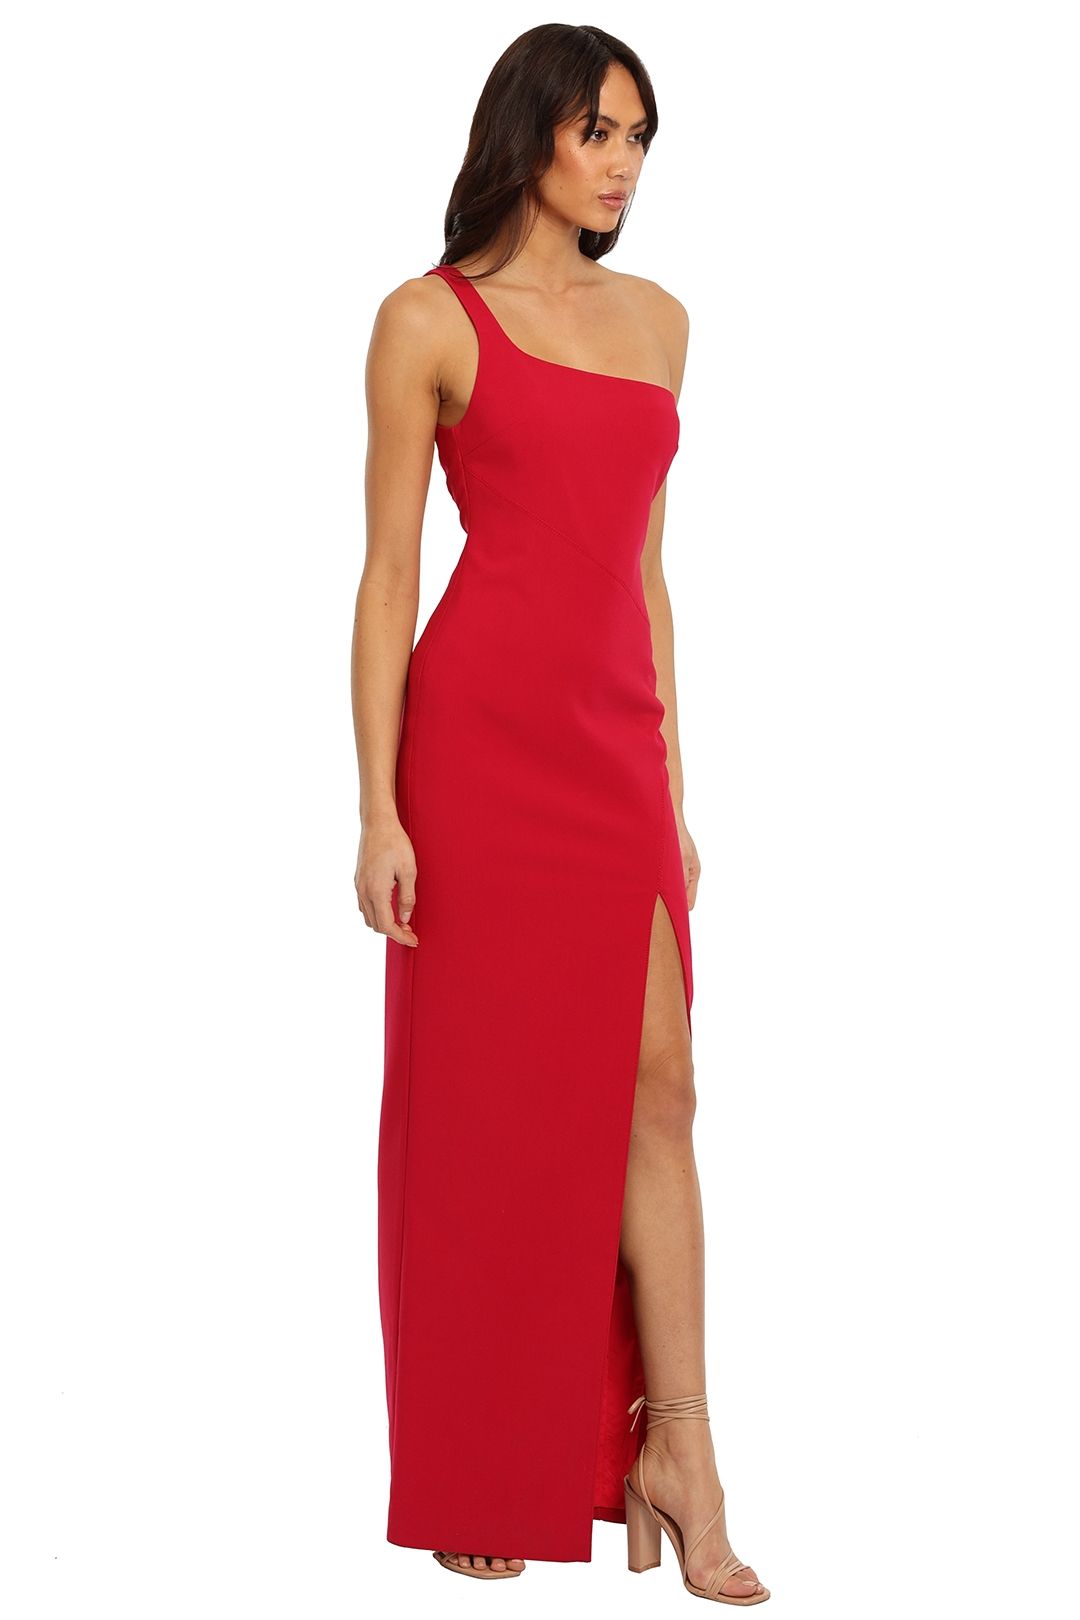 Likely NYC Camden Gown Scarlett one shoulder